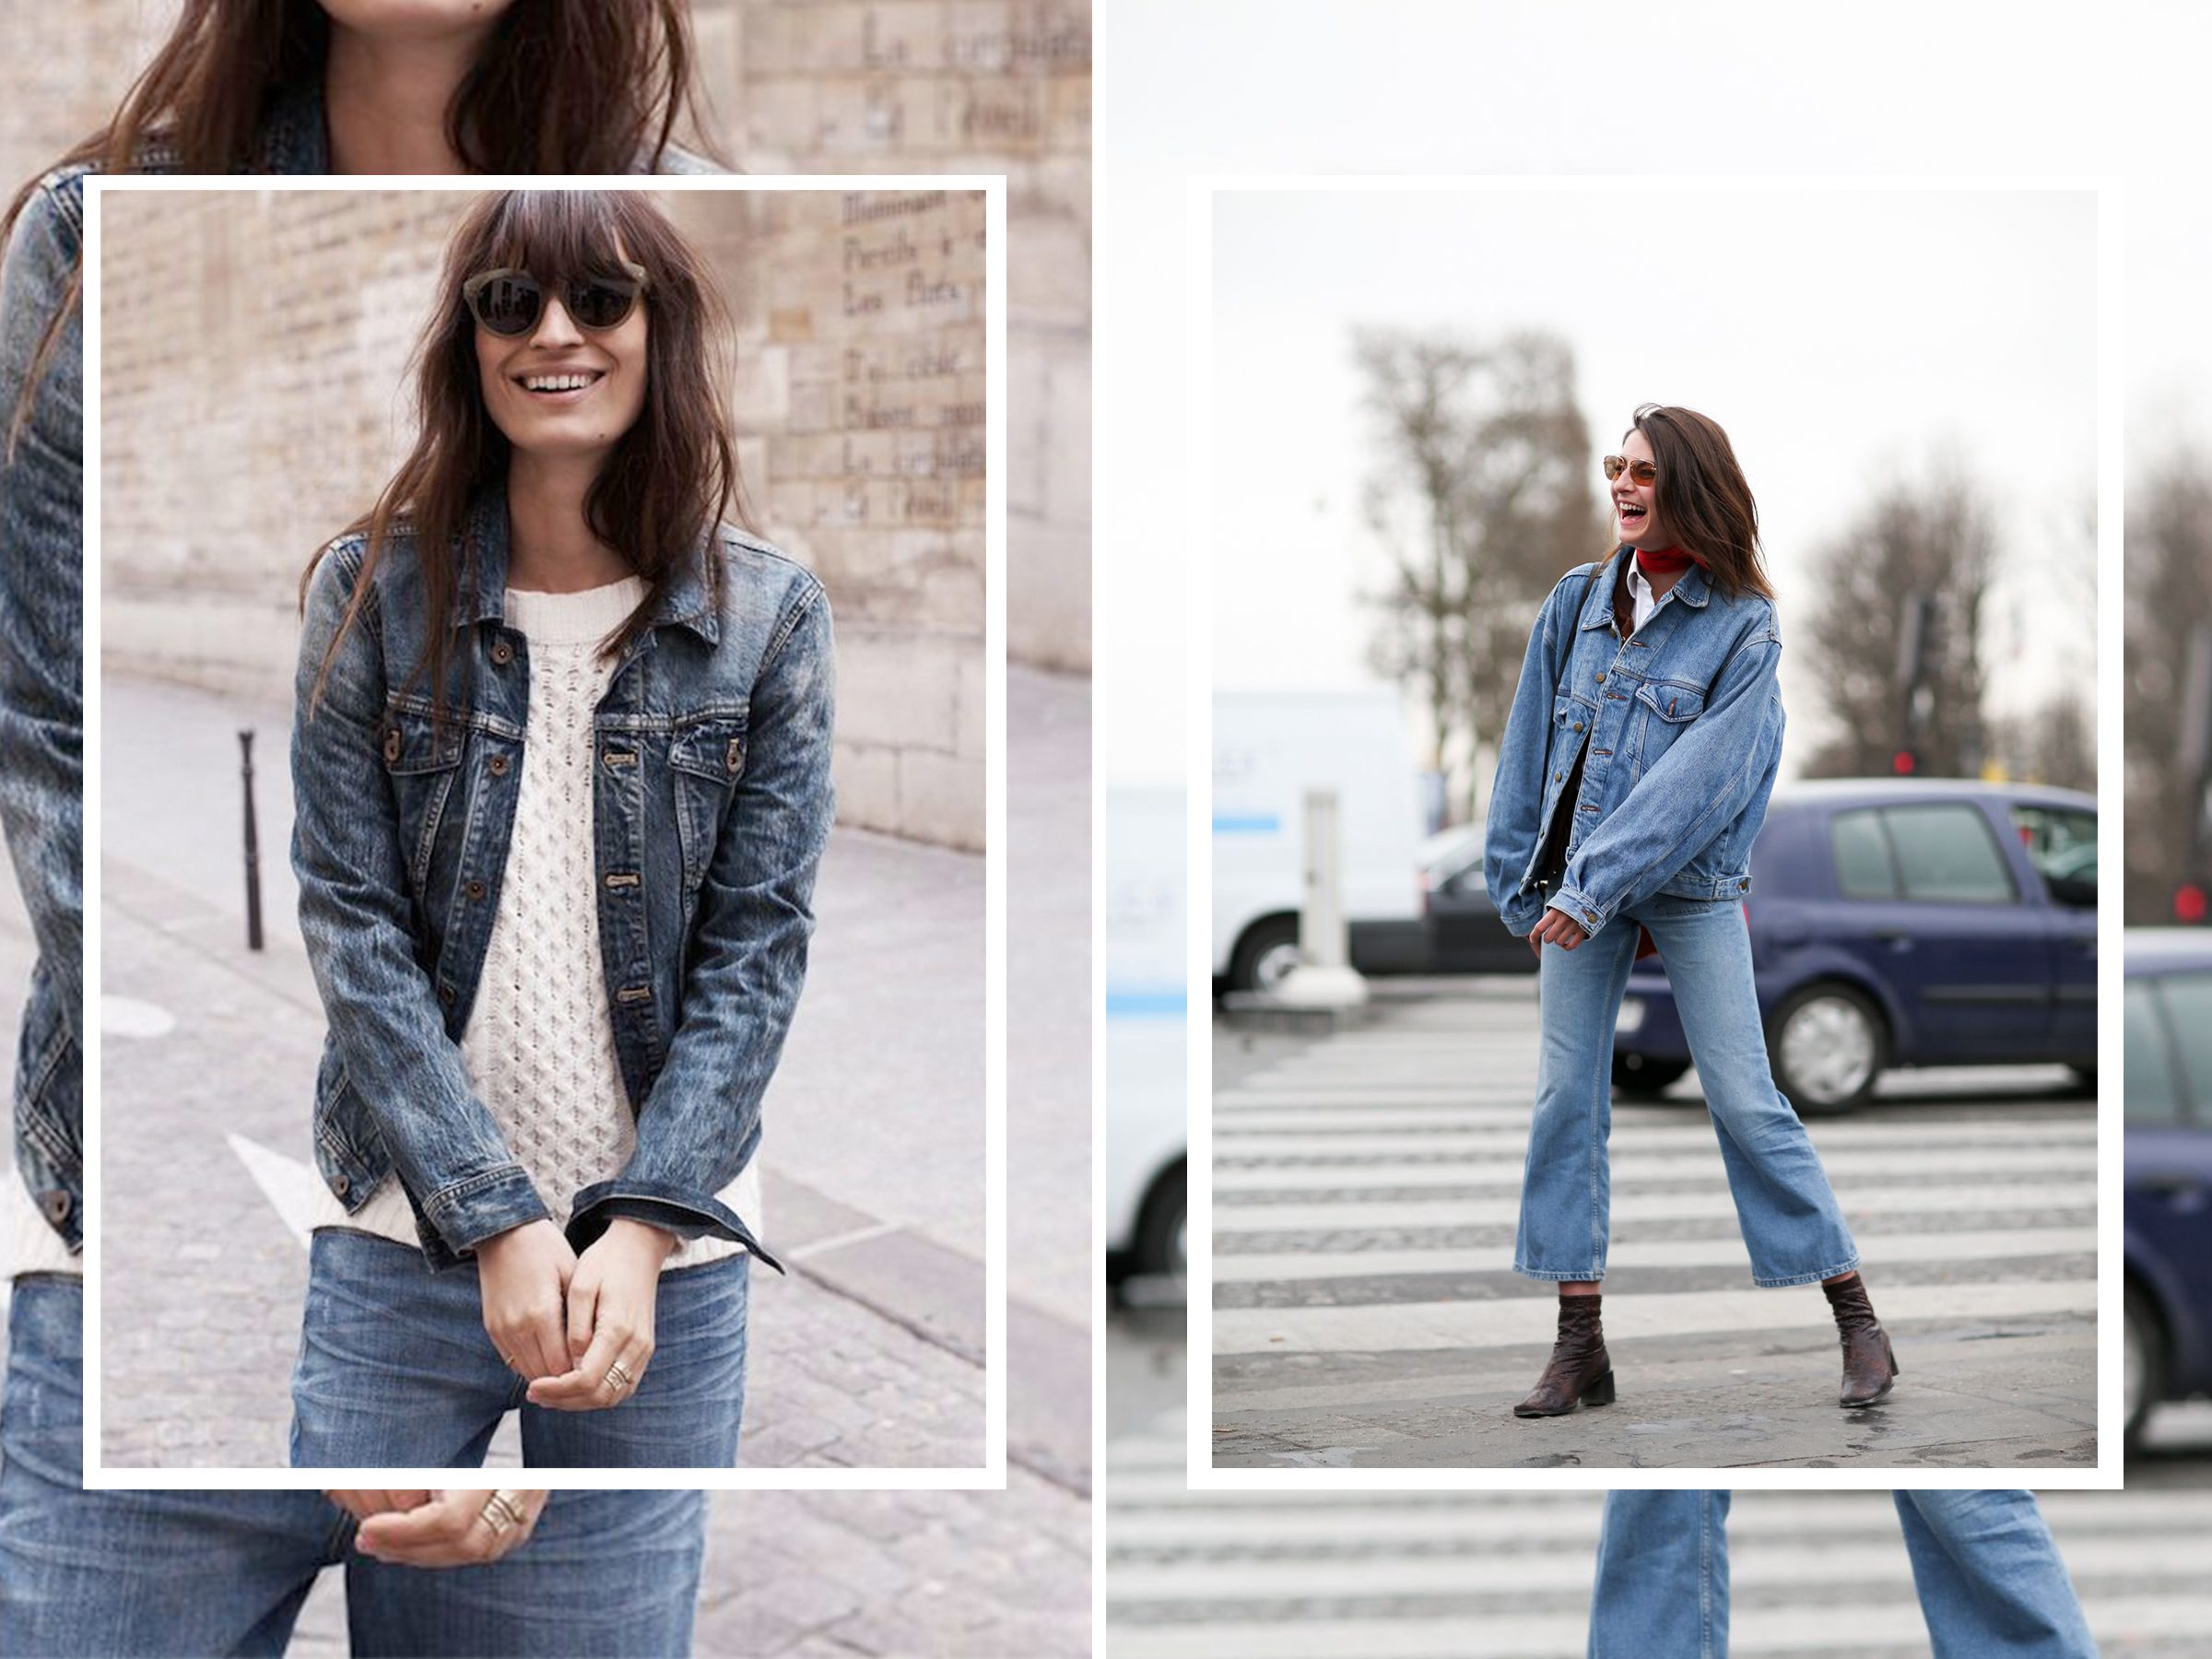 The Denim Jacket: Have You Got Yours ? on vickiarcher.com